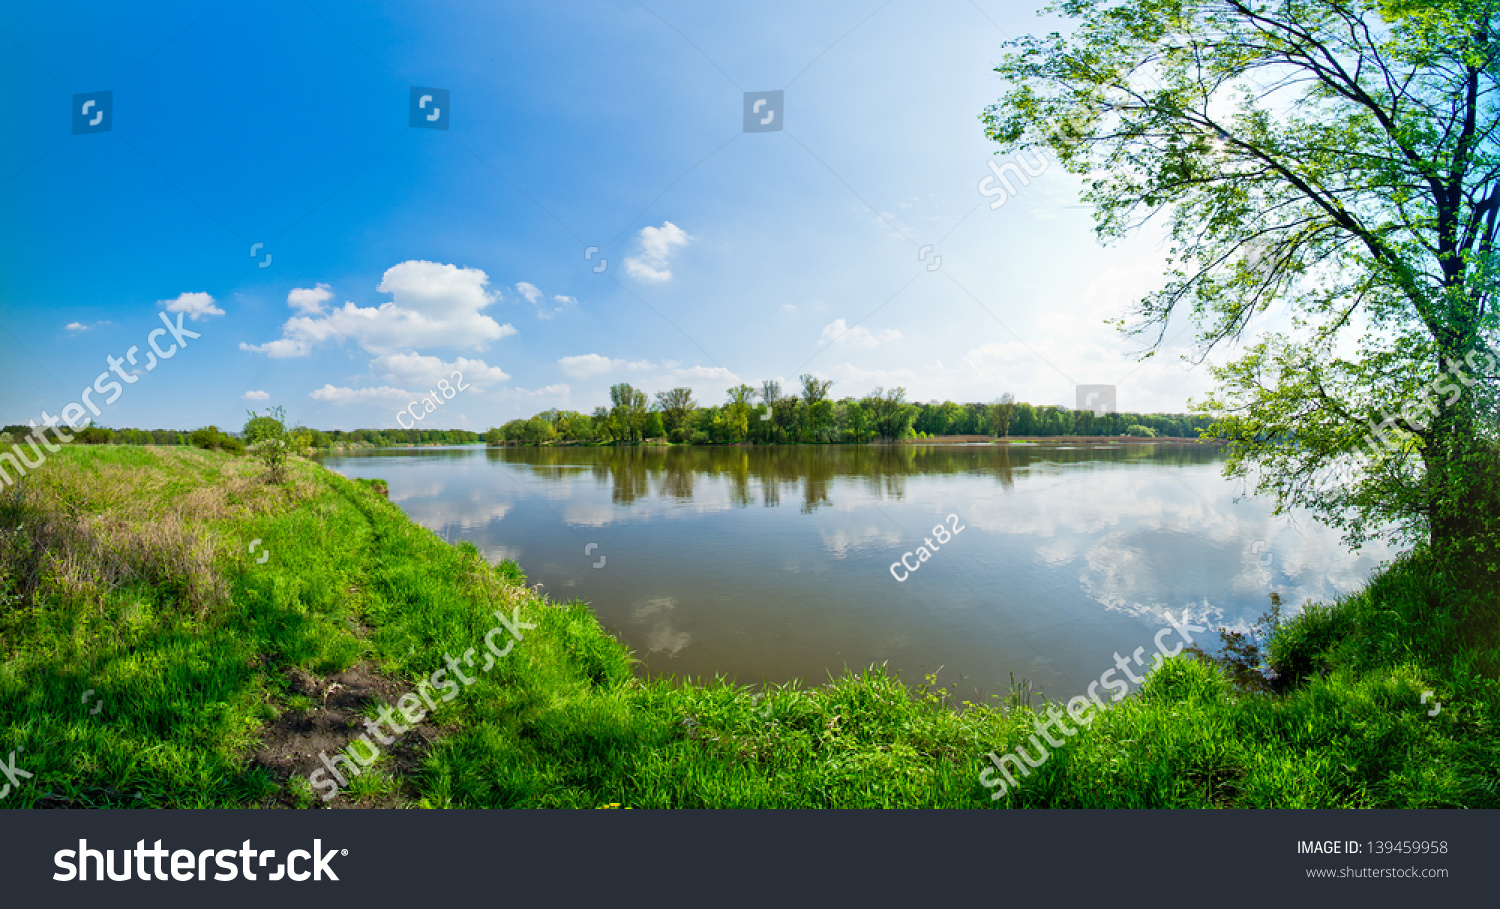 Odra river during the spring time #139459958